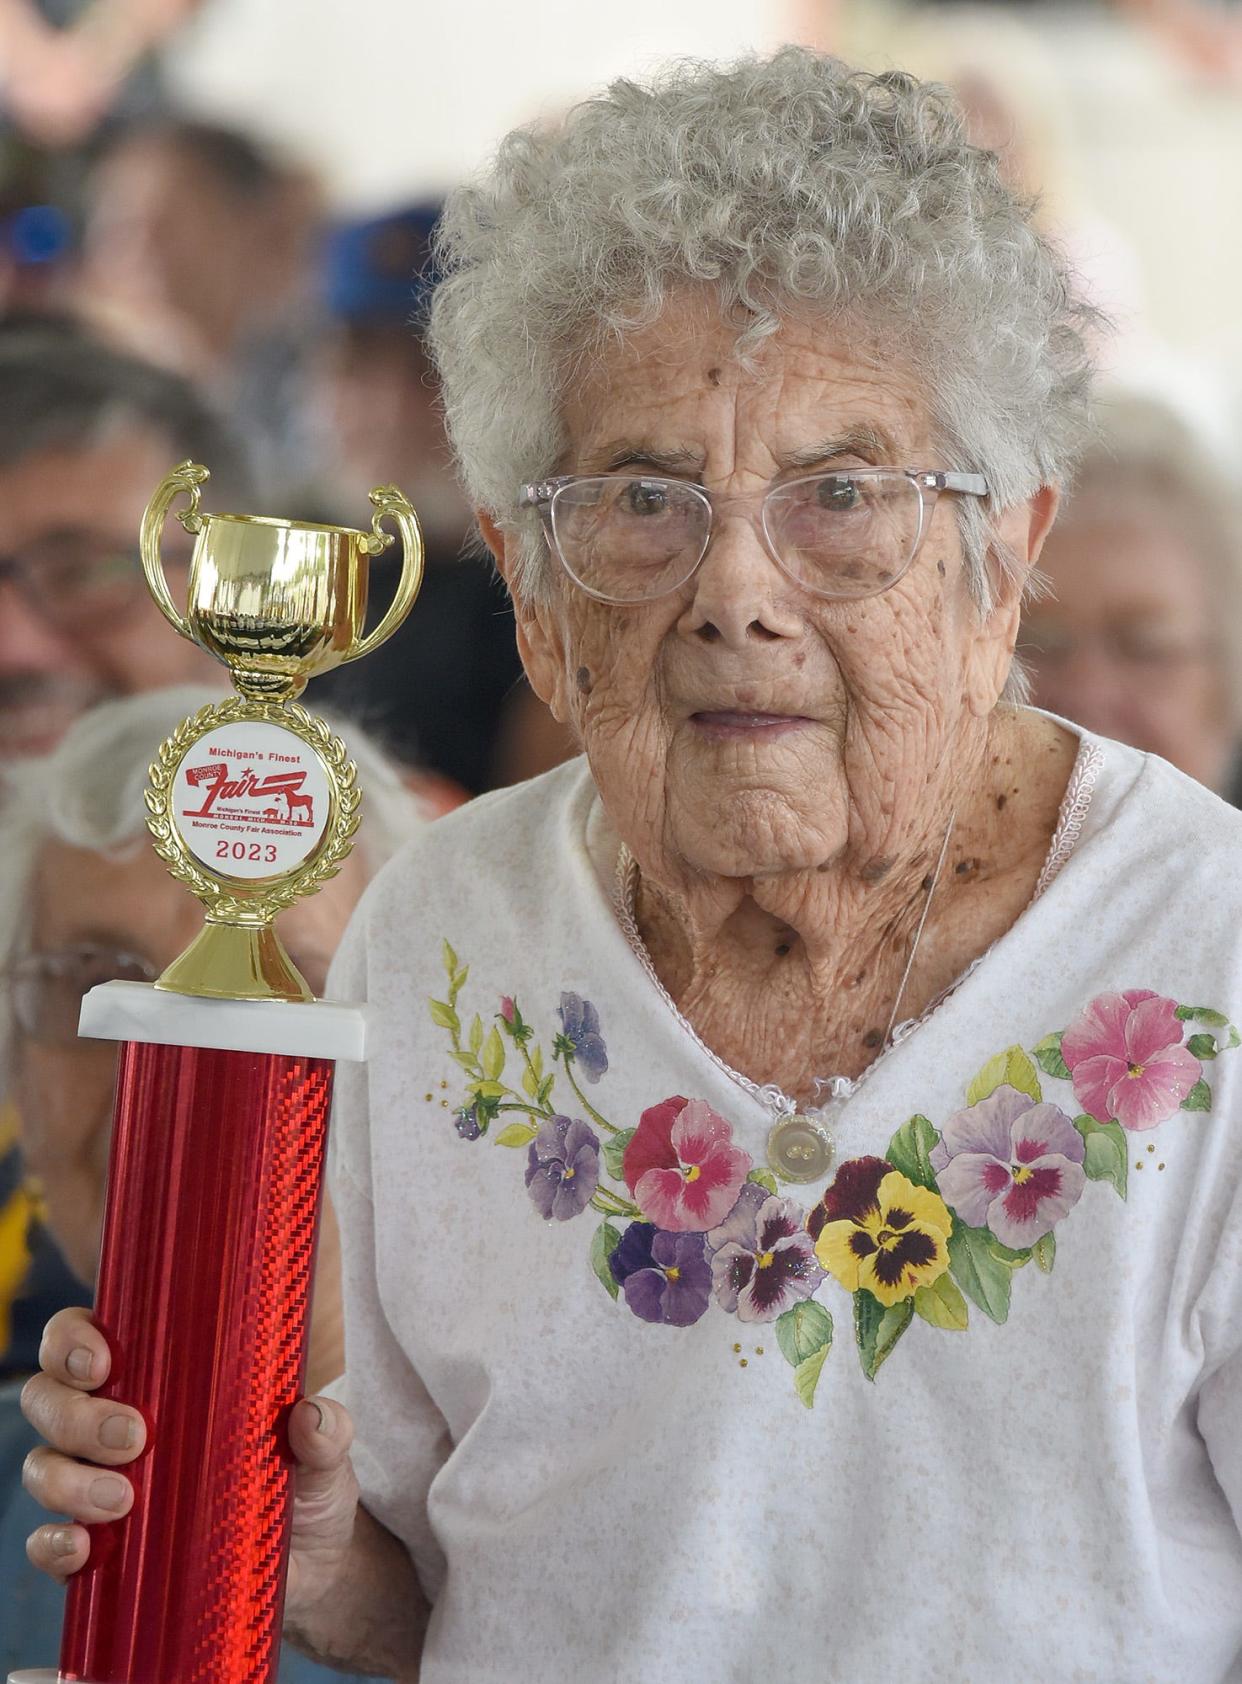 Marion Yoas, of Newport, was awarded the trophy for oldest women attending the Senior Citizens' Program Wednesday at the 2023 Monroe County Fair. She is 107 and will turn 108 next month.